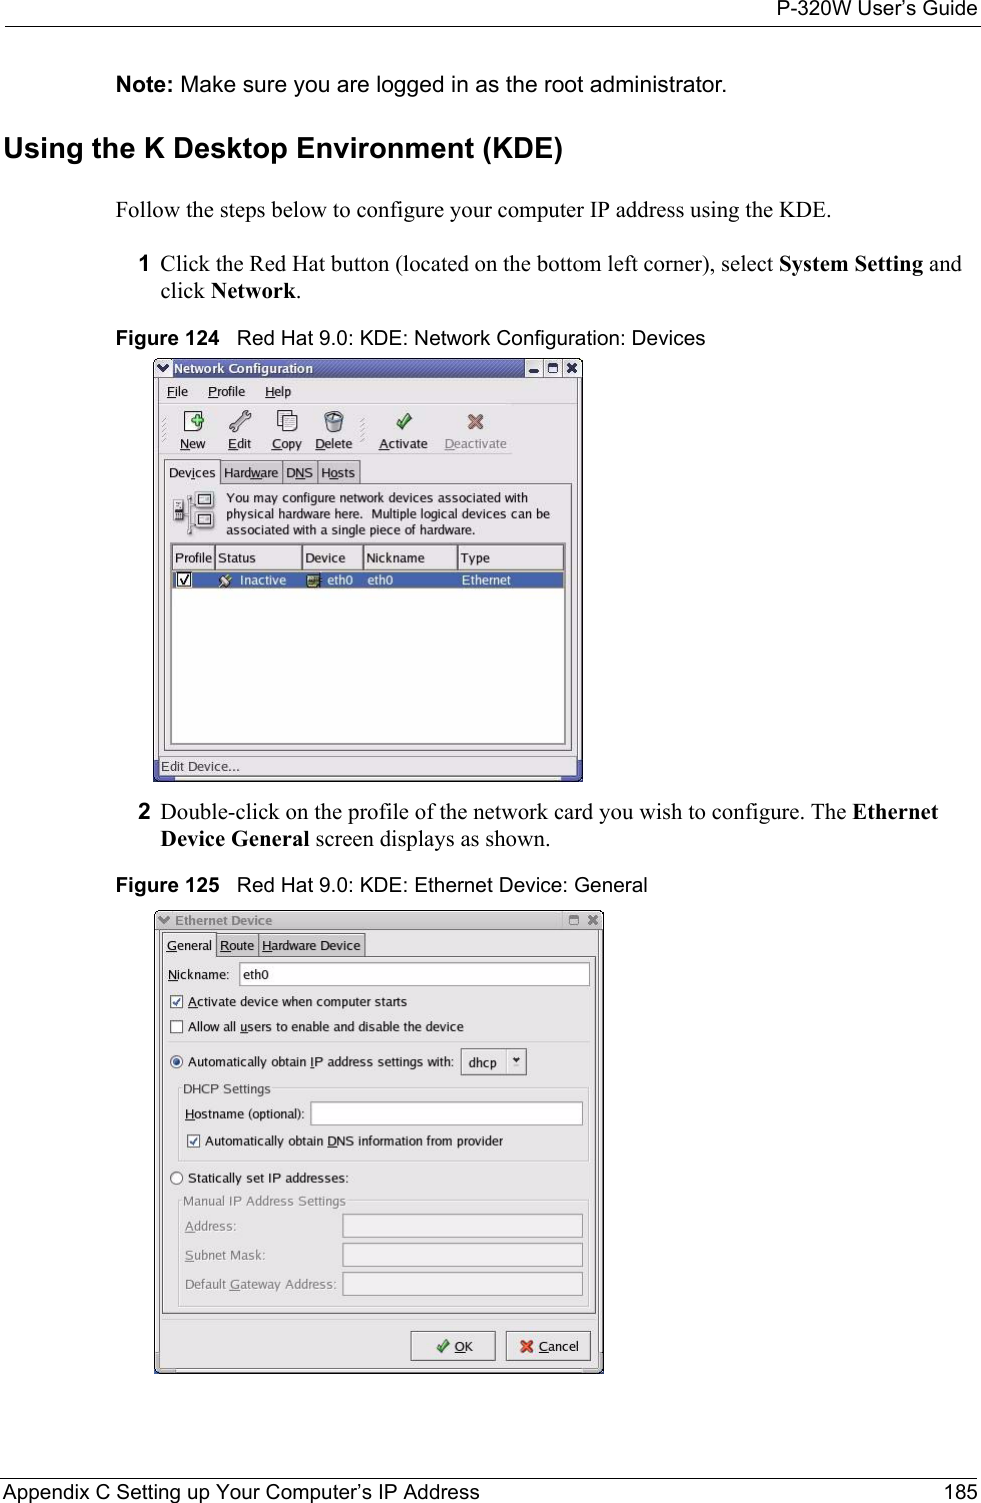 P-320W User’s GuideAppendix C Setting up Your Computer’s IP Address 185Note: Make sure you are logged in as the root administrator. Using the K Desktop Environment (KDE)Follow the steps below to configure your computer IP address using the KDE. 1Click the Red Hat button (located on the bottom left corner), select System Setting and click Network.Figure 124   Red Hat 9.0: KDE: Network Configuration: Devices 2Double-click on the profile of the network card you wish to configure. The Ethernet Device General screen displays as shown. Figure 125   Red Hat 9.0: KDE: Ethernet Device: General  